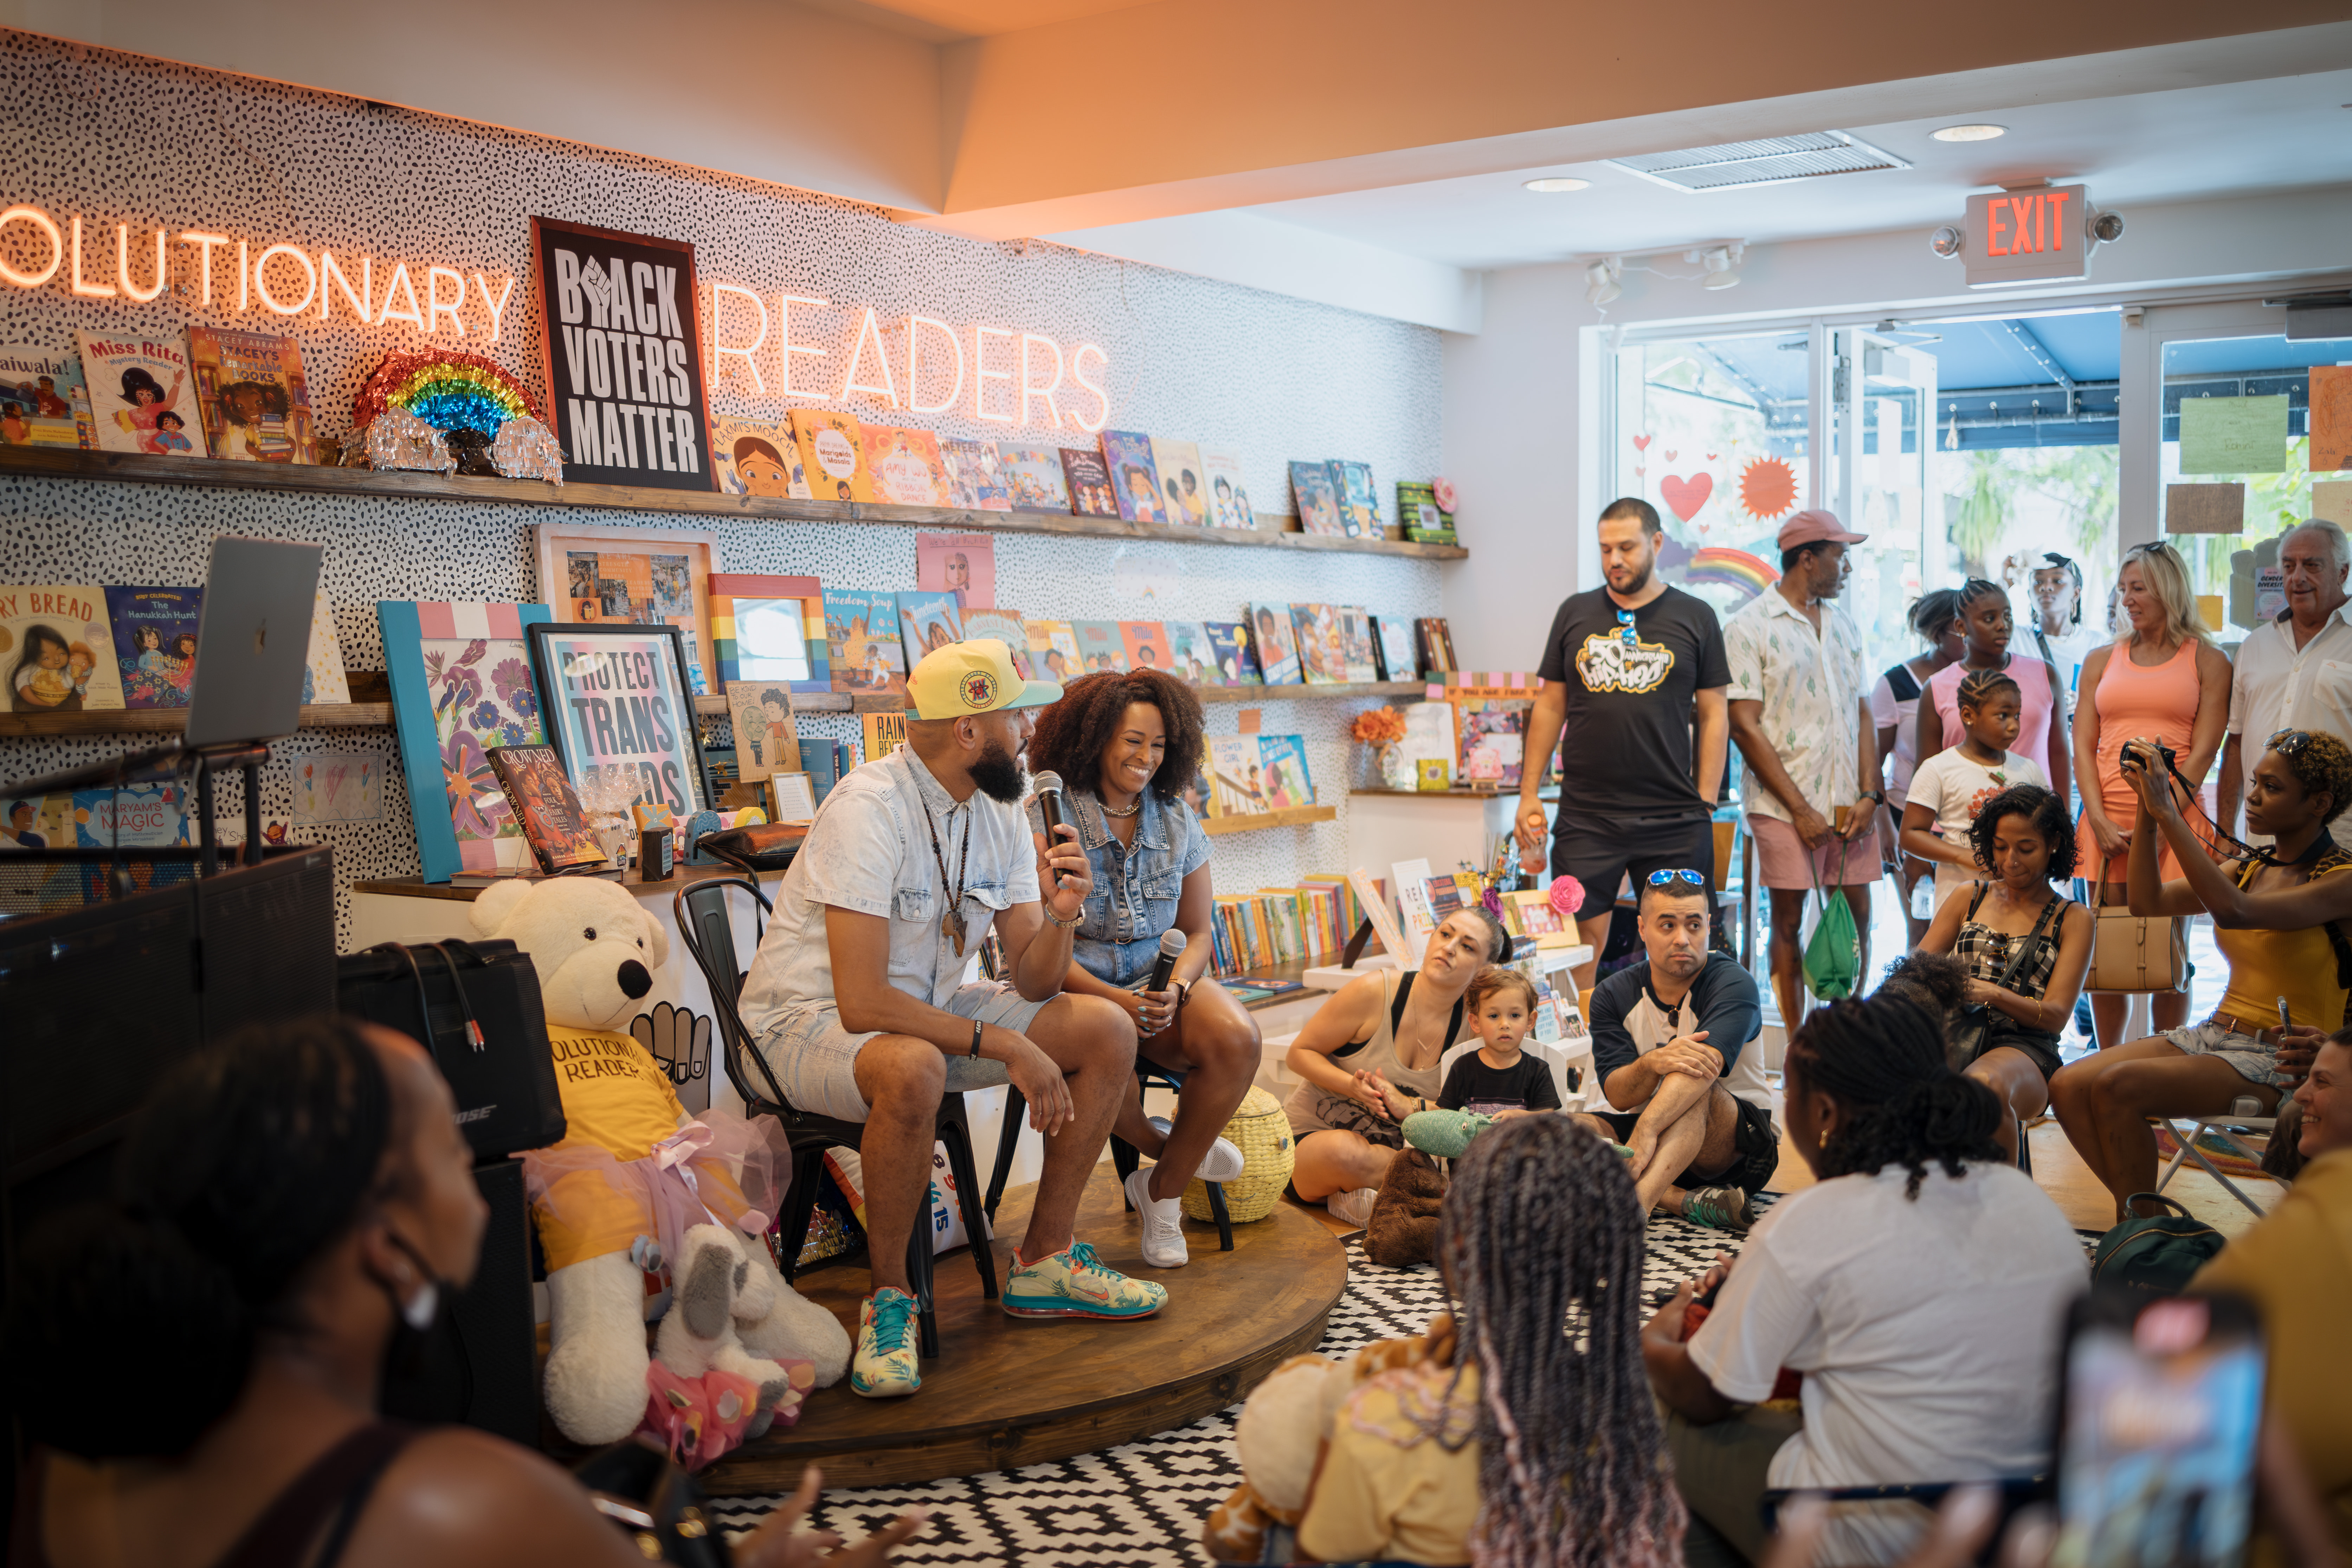 The History of Hip Hop discussion hosted at Rohi's Readery